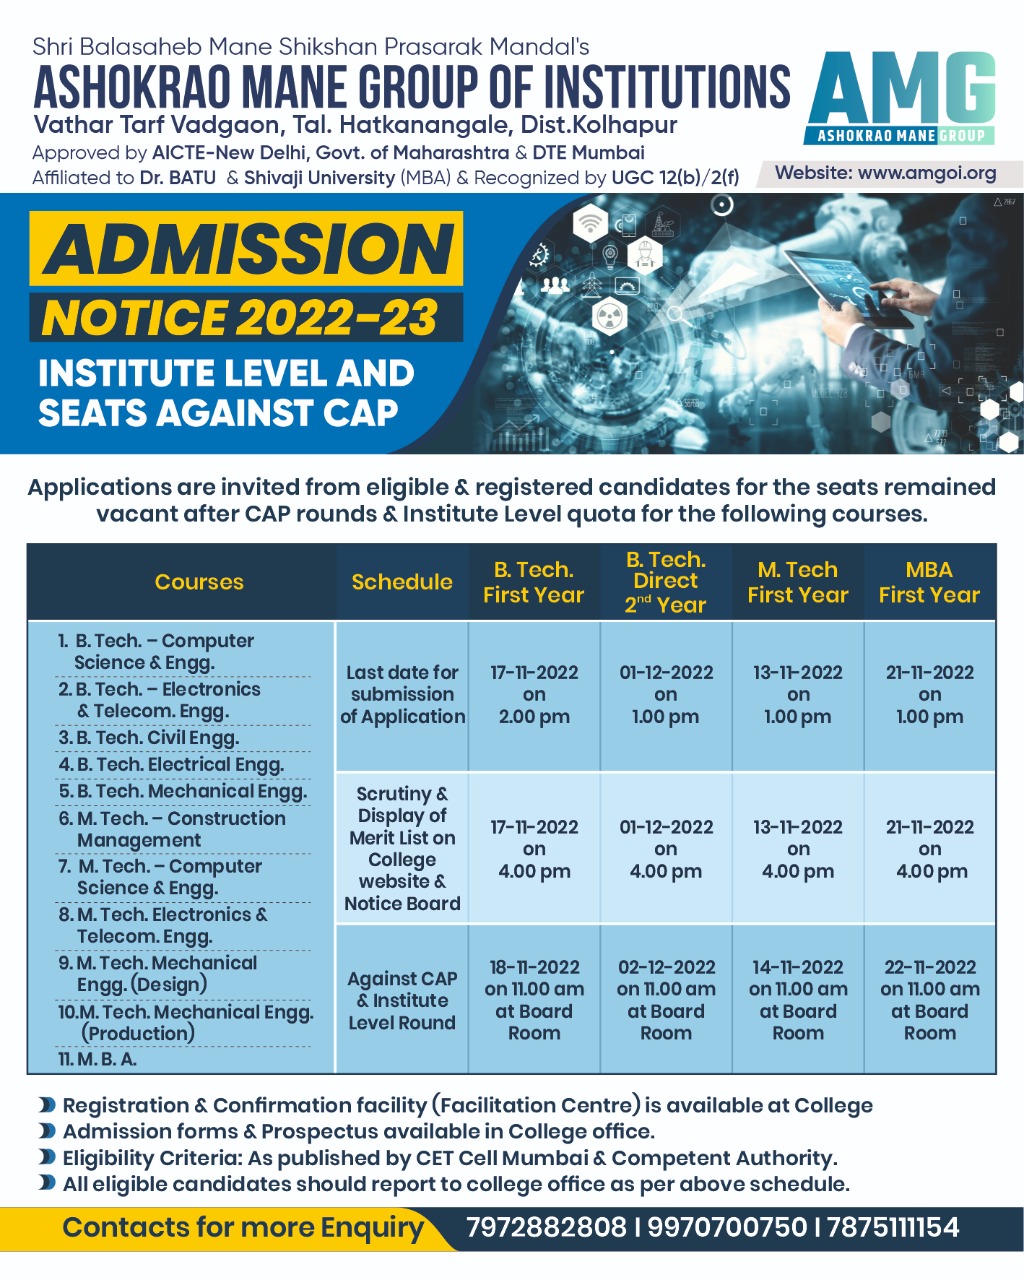 Applications are Invited for Institute Level Quota